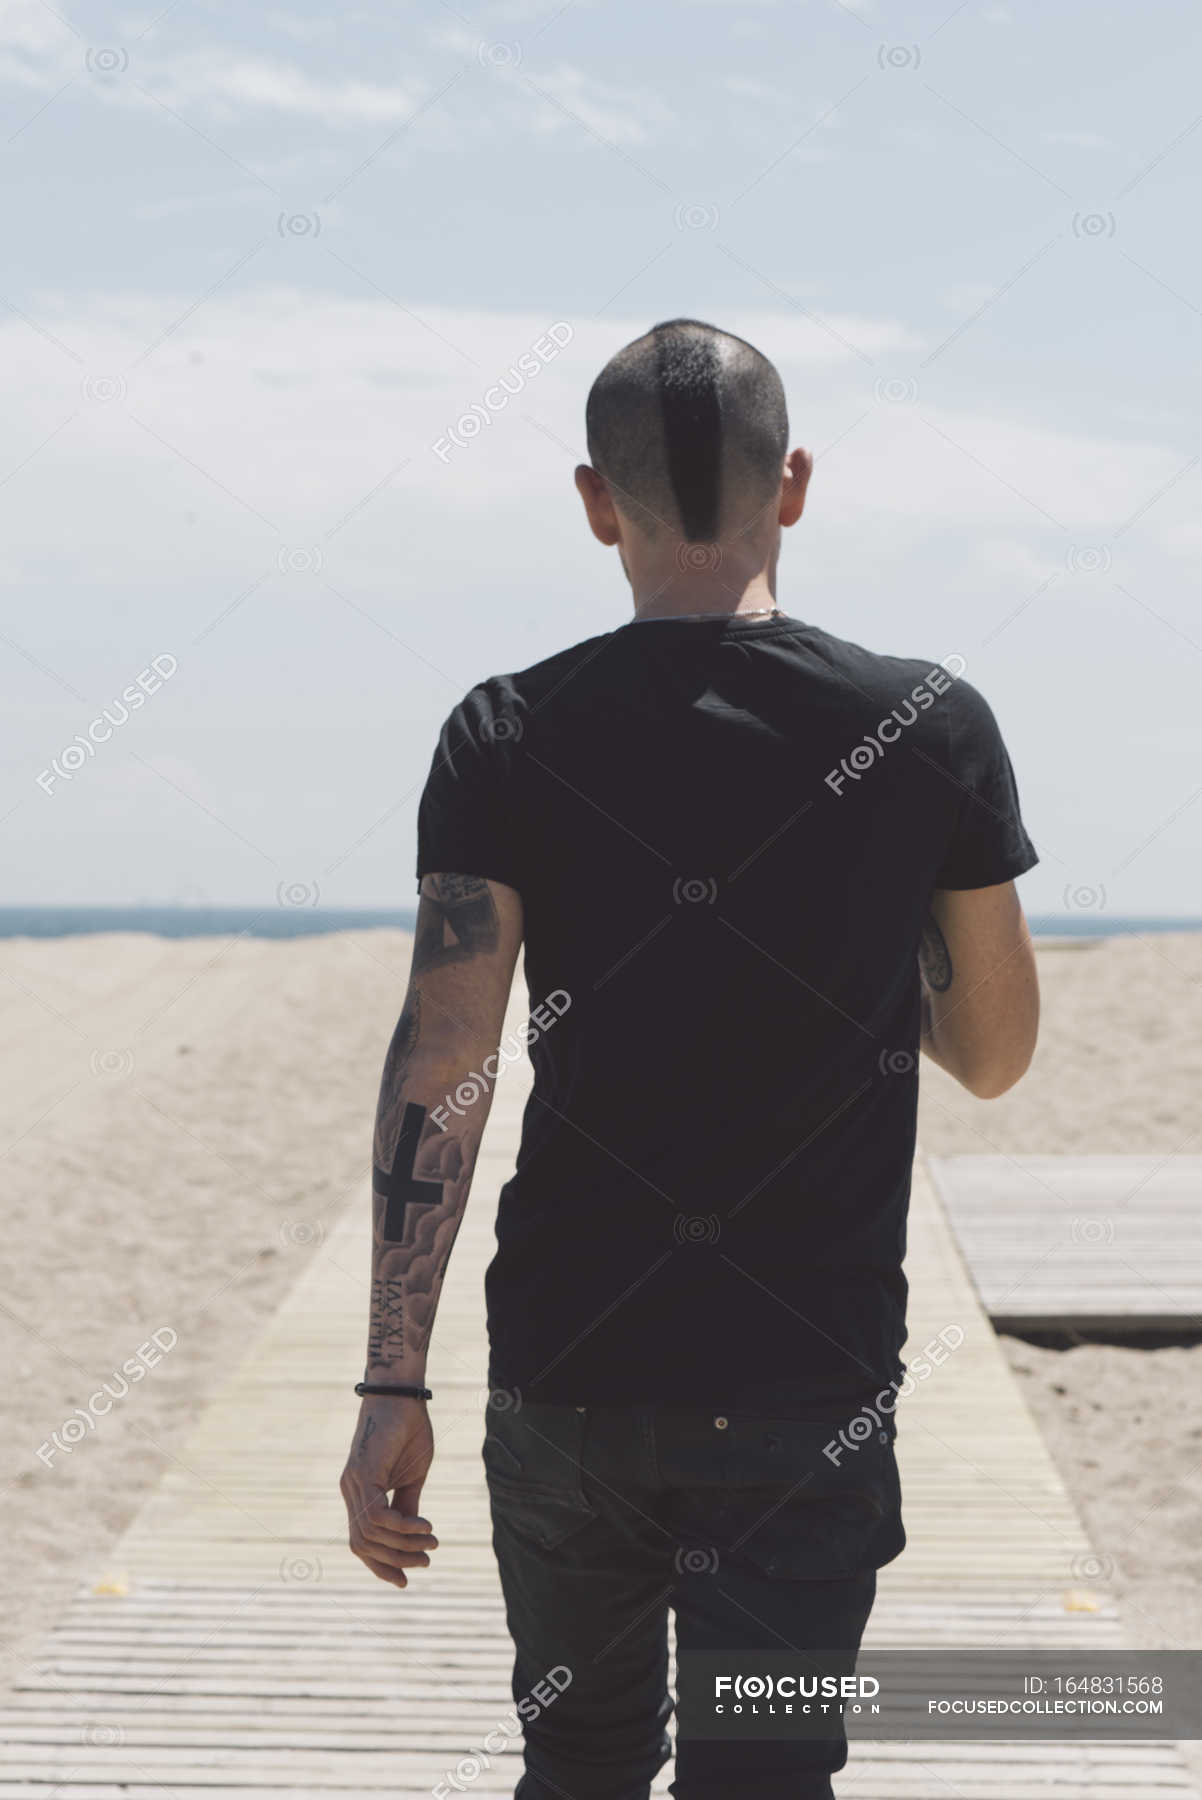 Back View Of Young Man With Mohawk Haircut And Tattoos Walking On